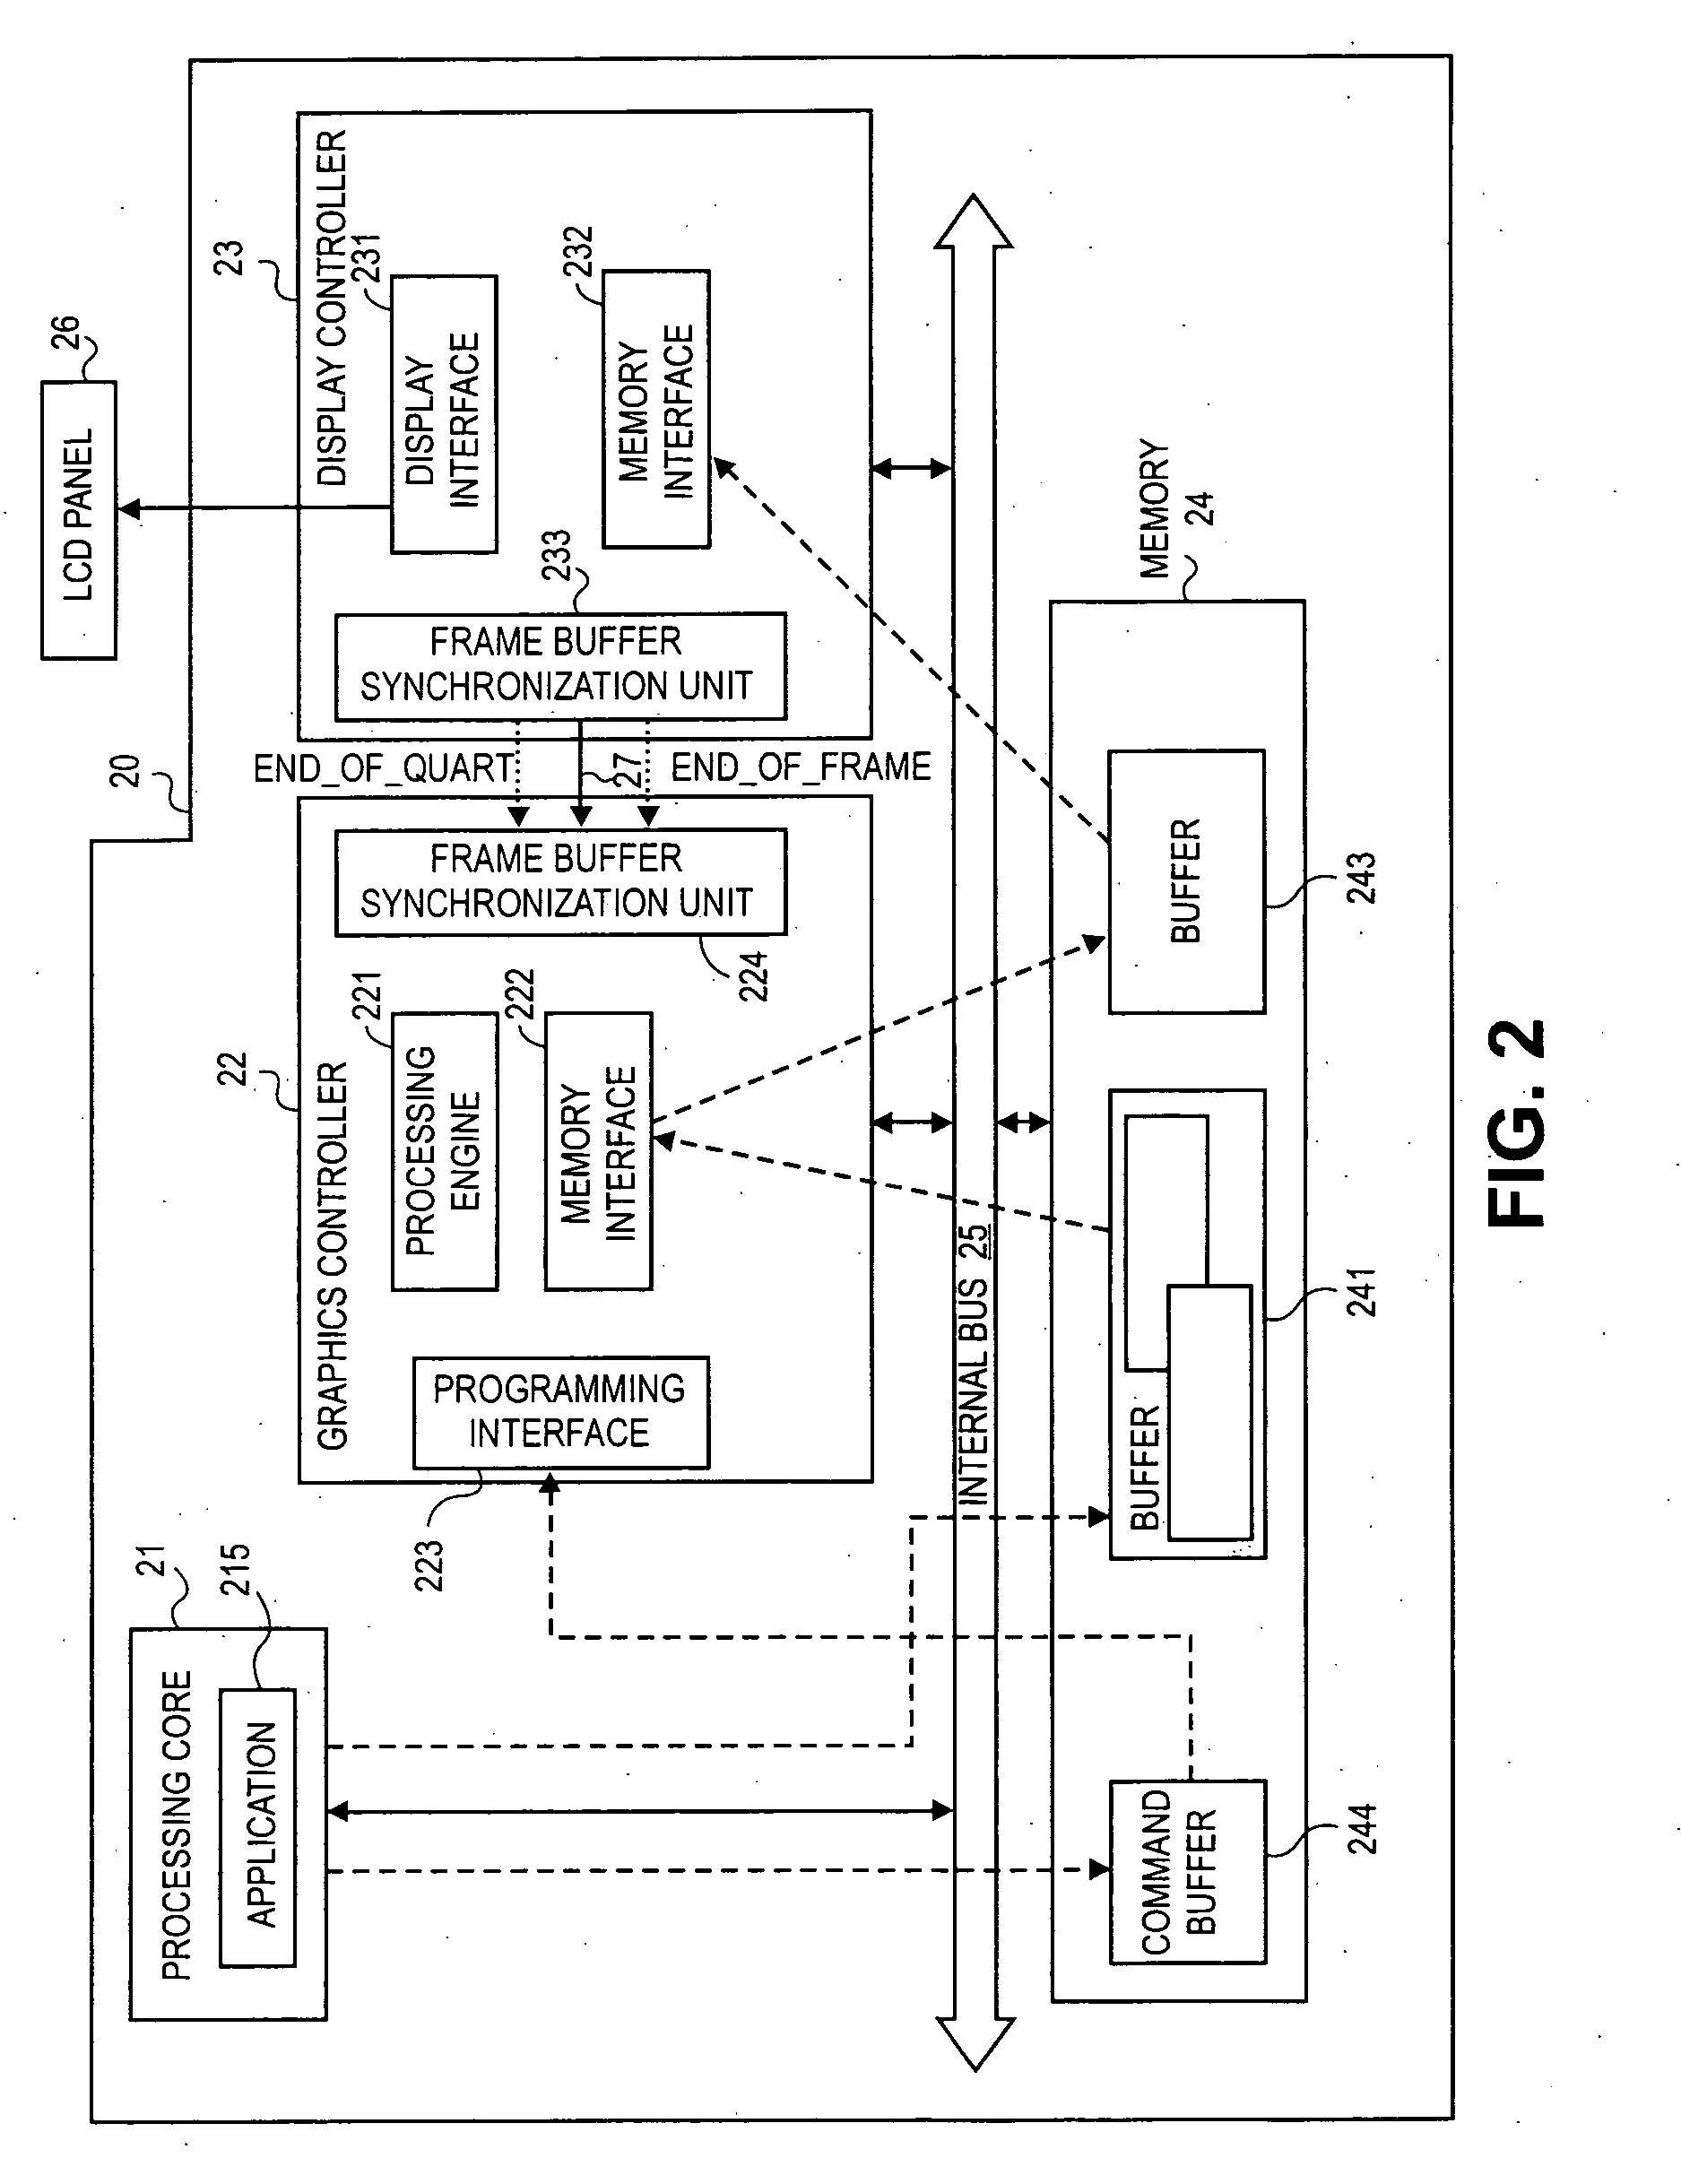 Method and apparatus for displaying rotated images